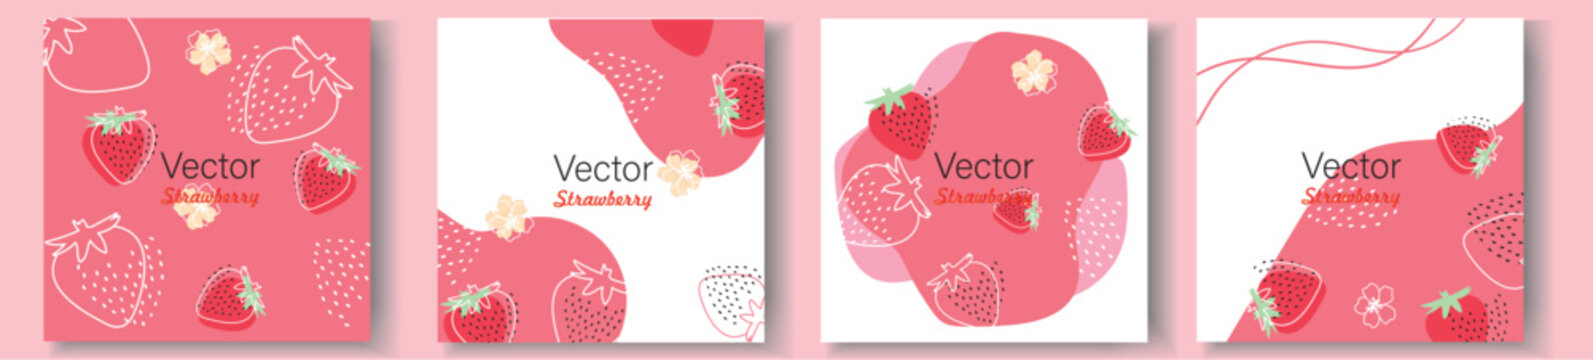 set of pink backgrounds with strawberries abstract